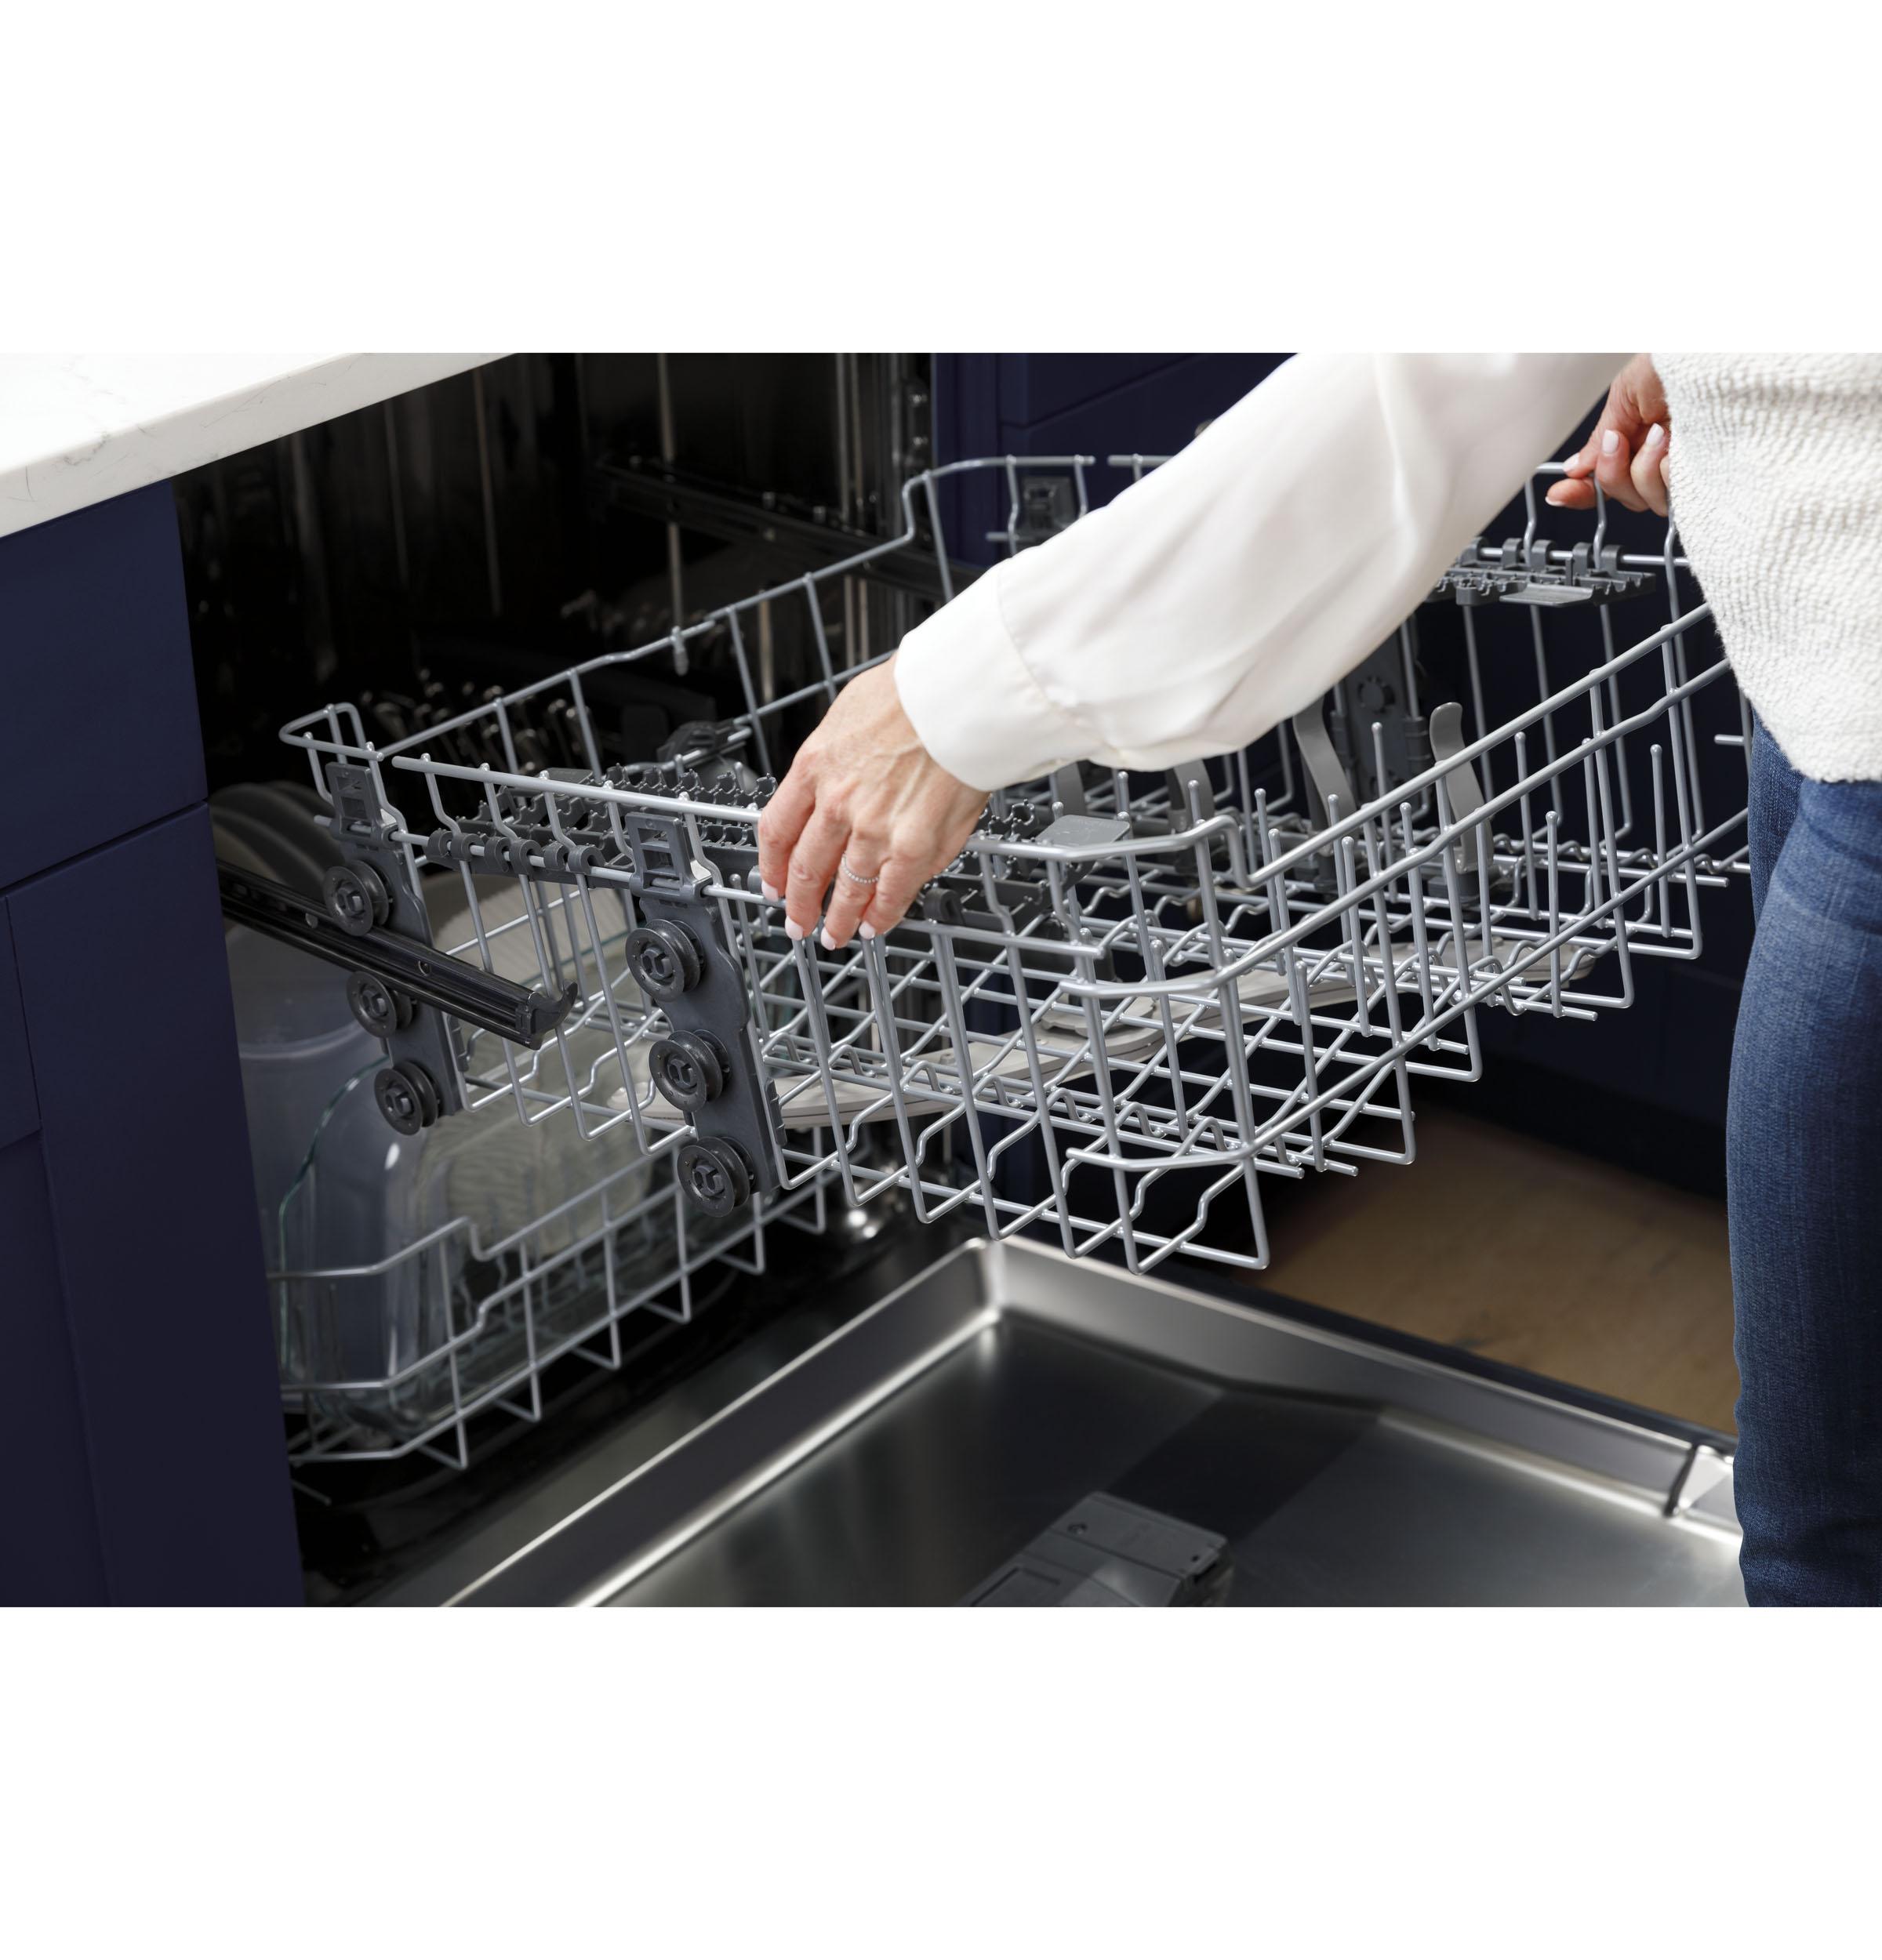 GE® ENERGY STAR® Top Control with Stainless Steel Interior Dishwasher with Sanitize Cycle & Dry Boost with Fan Assist